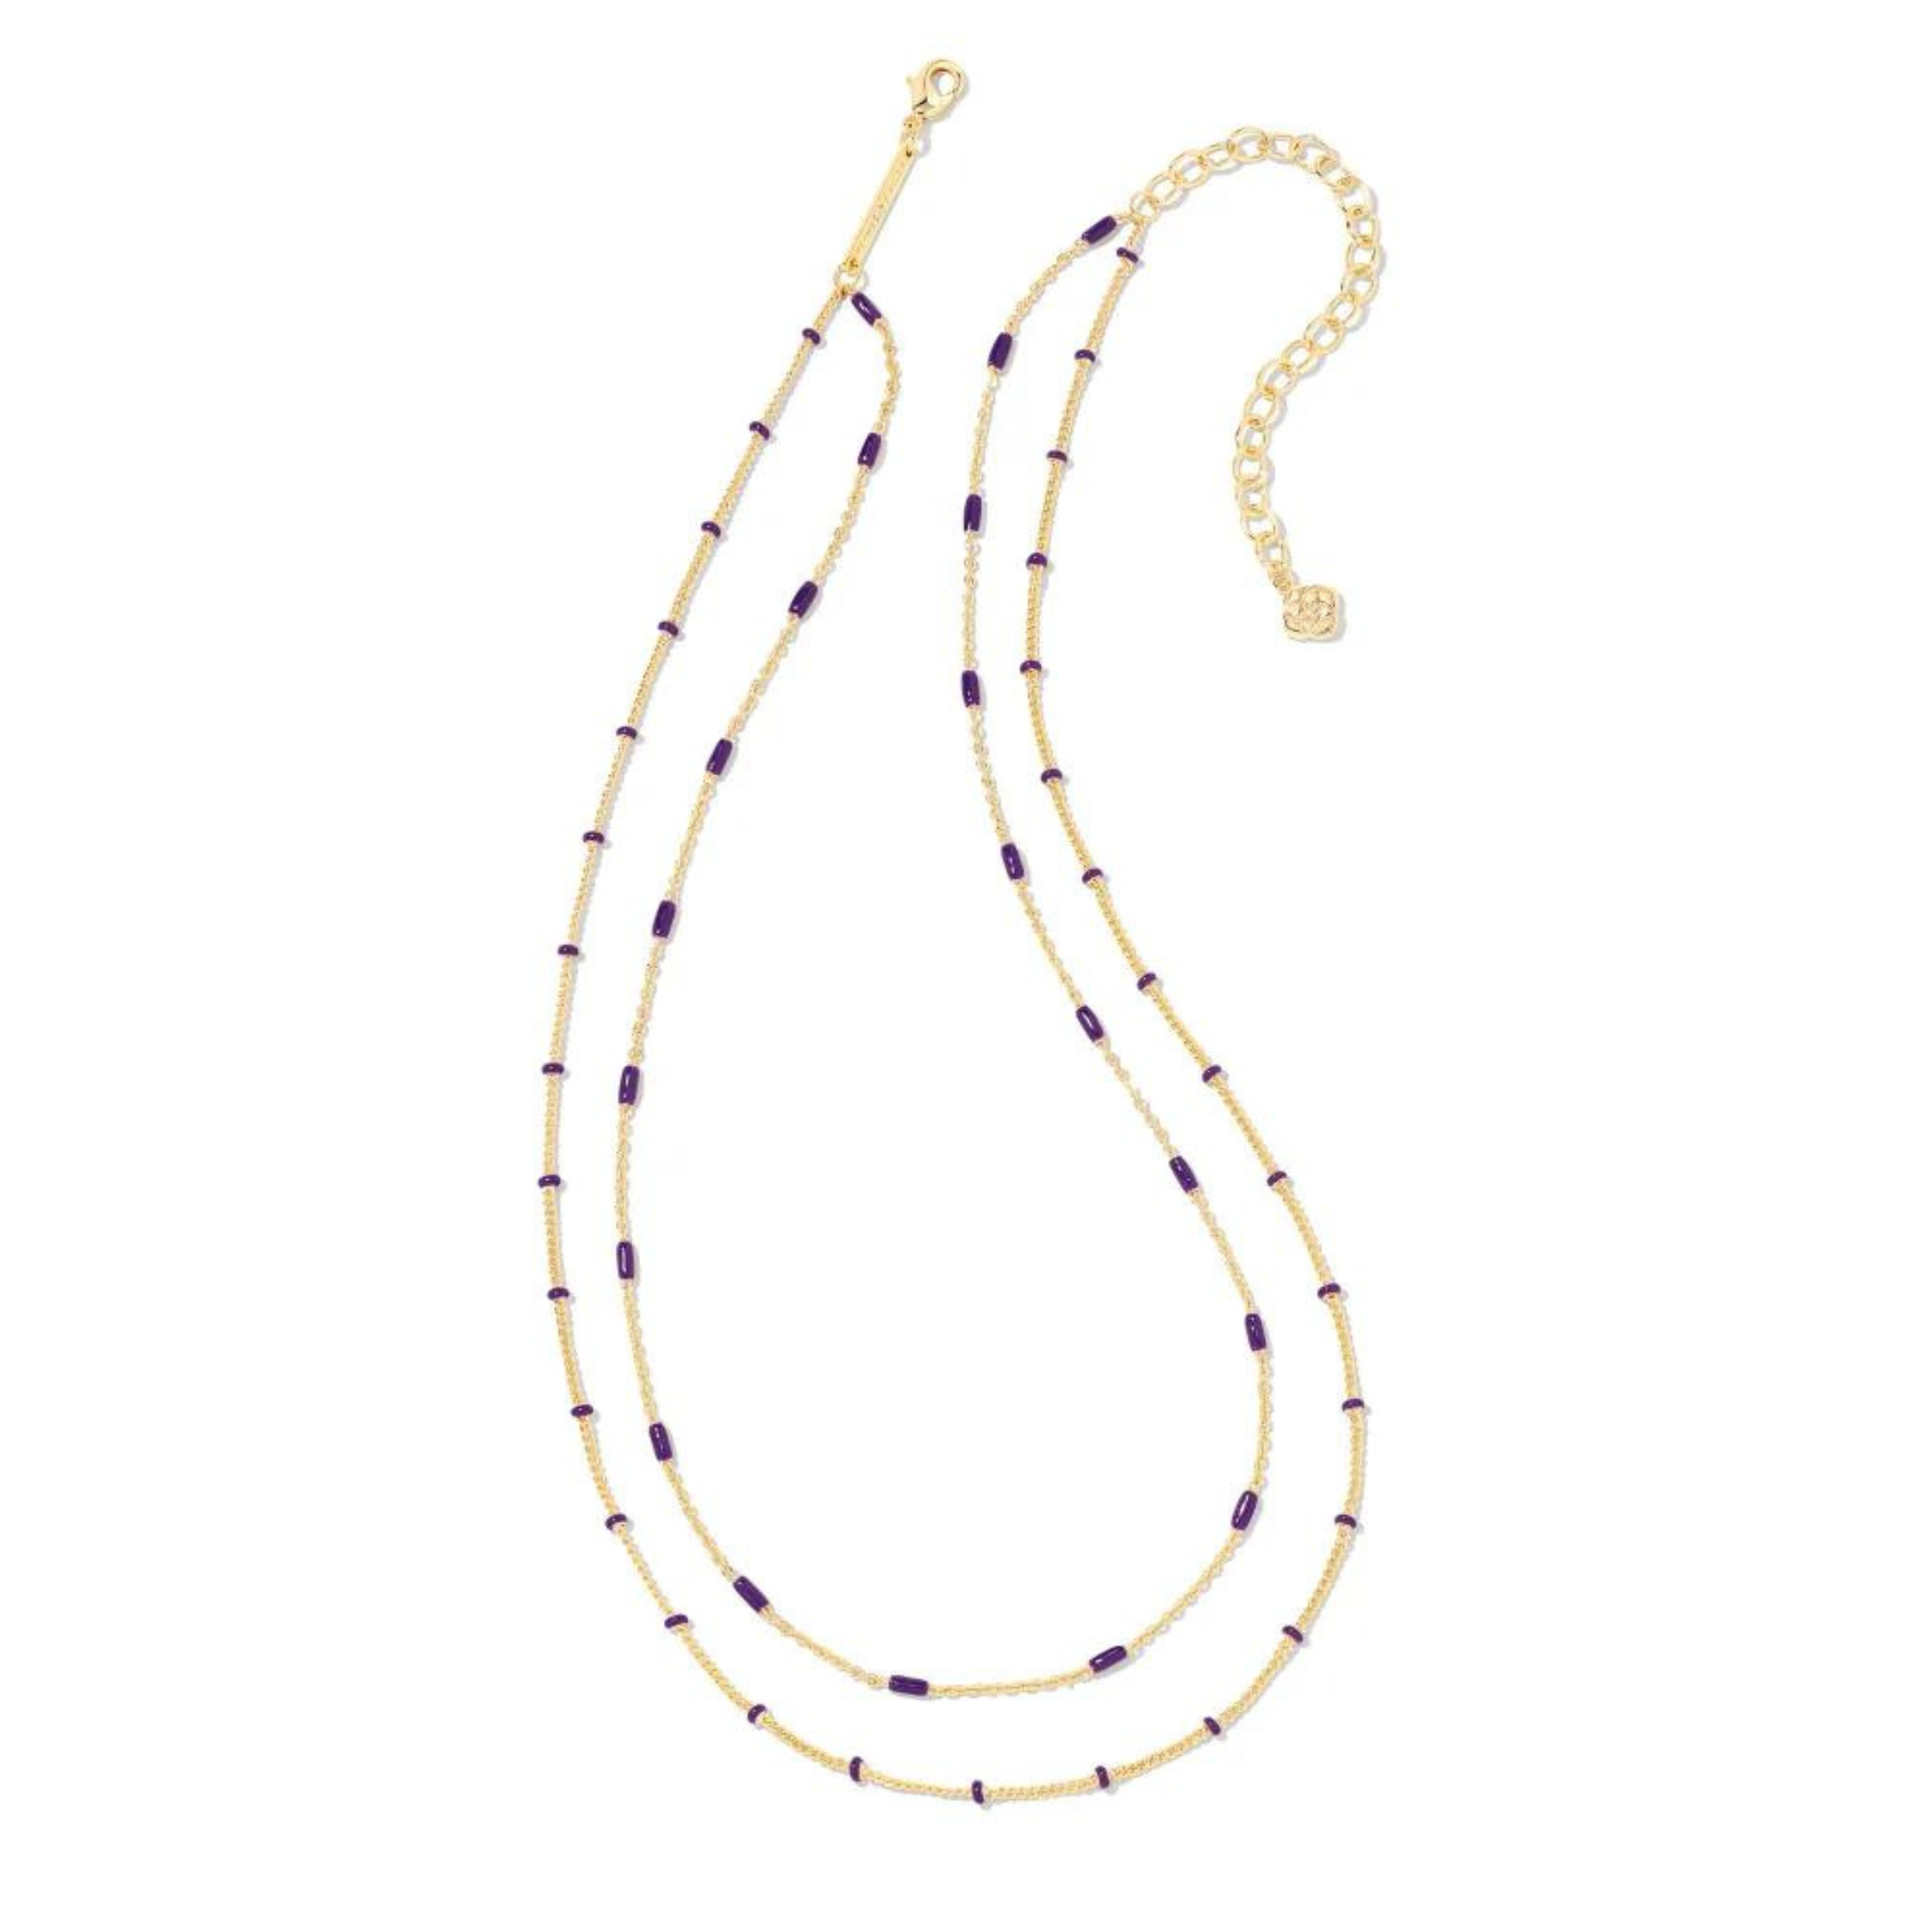 Two strand, adjustable chain necklace with amethyst enamel spacers. This necklace is pictured on a white background. 